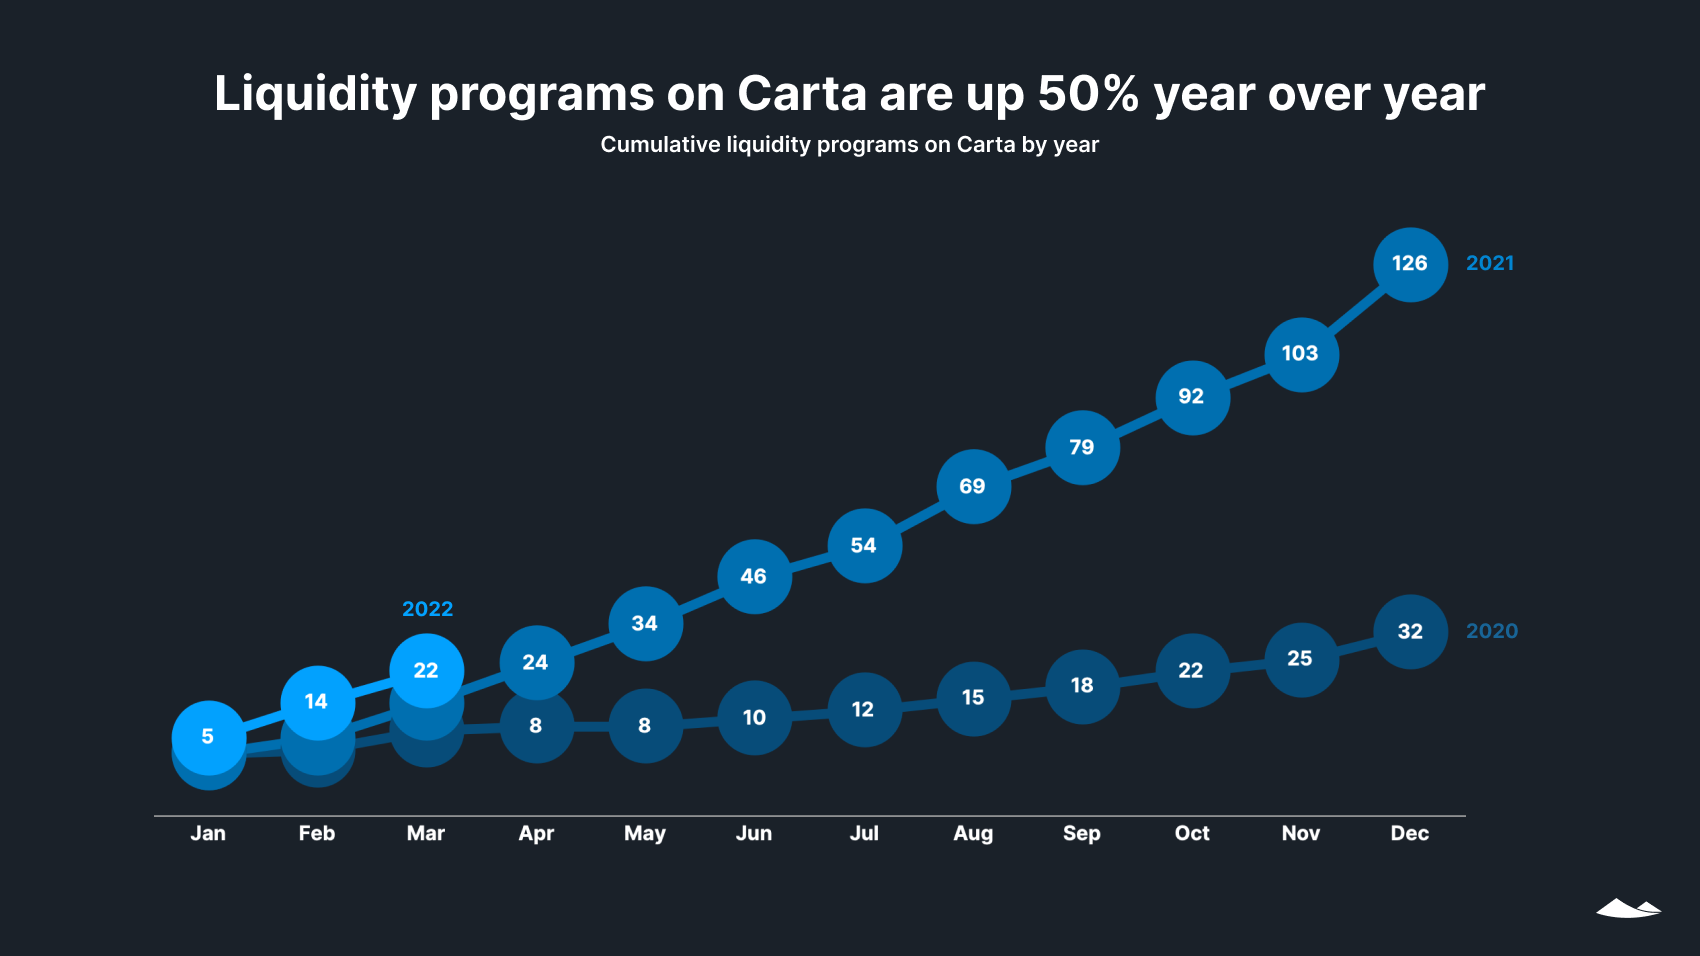 Liquidity programs on Carta are up 50 year over year